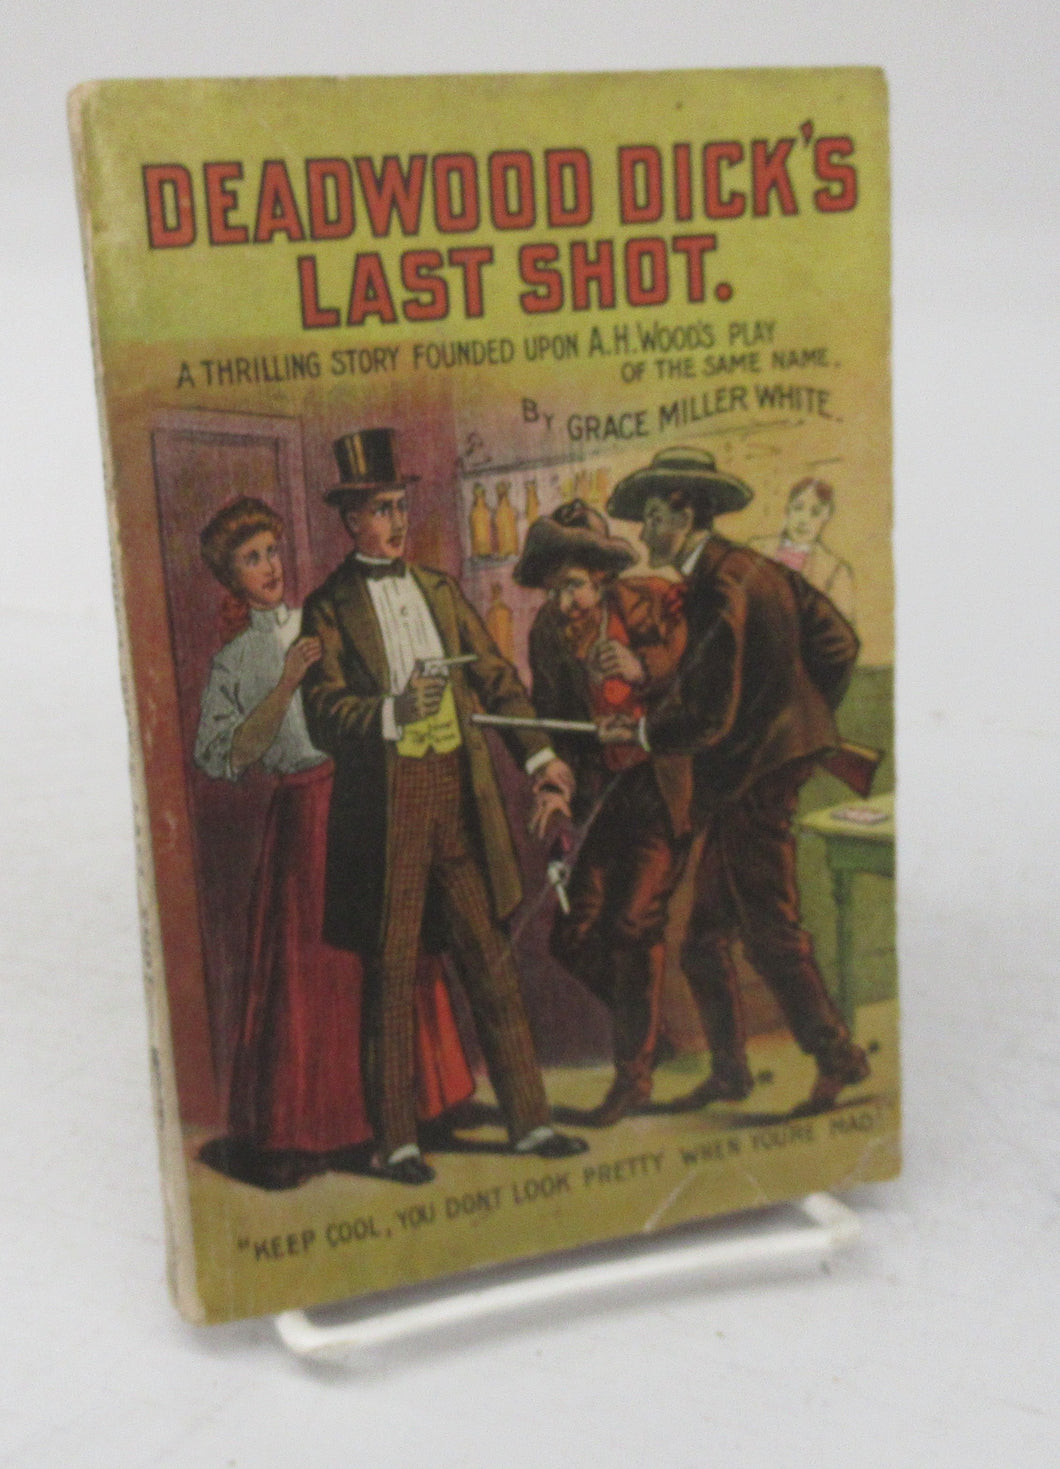 Deadwood Dick's Last Shot. A Thrilling Story Founded Upon A. H. Woods Thrilling Play of the Same Name